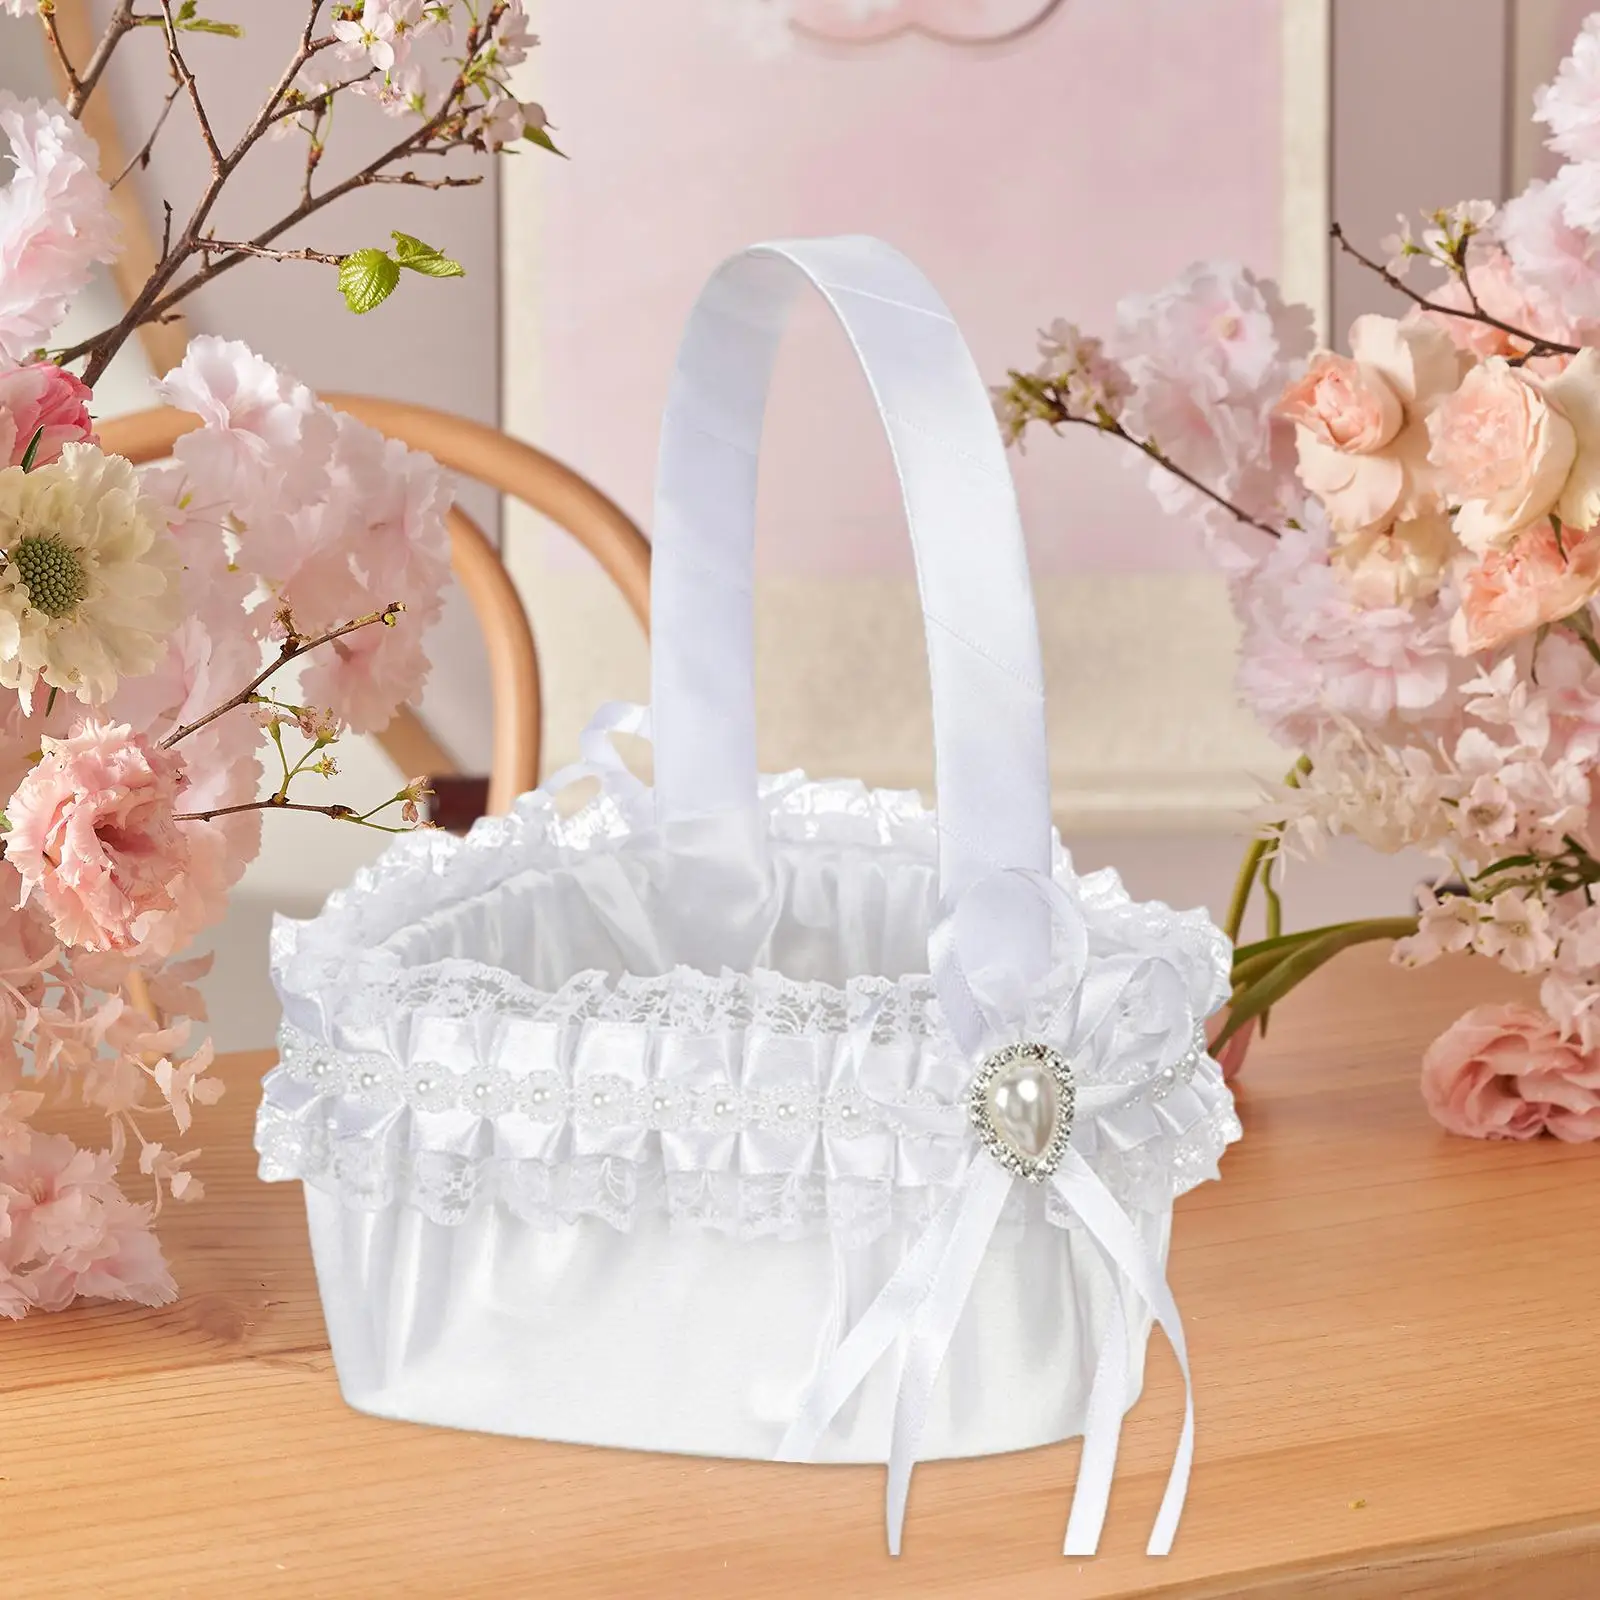 Flower Girl Baskets for Wedding Cute Bridesmaid Lace Basket for Centerpiece